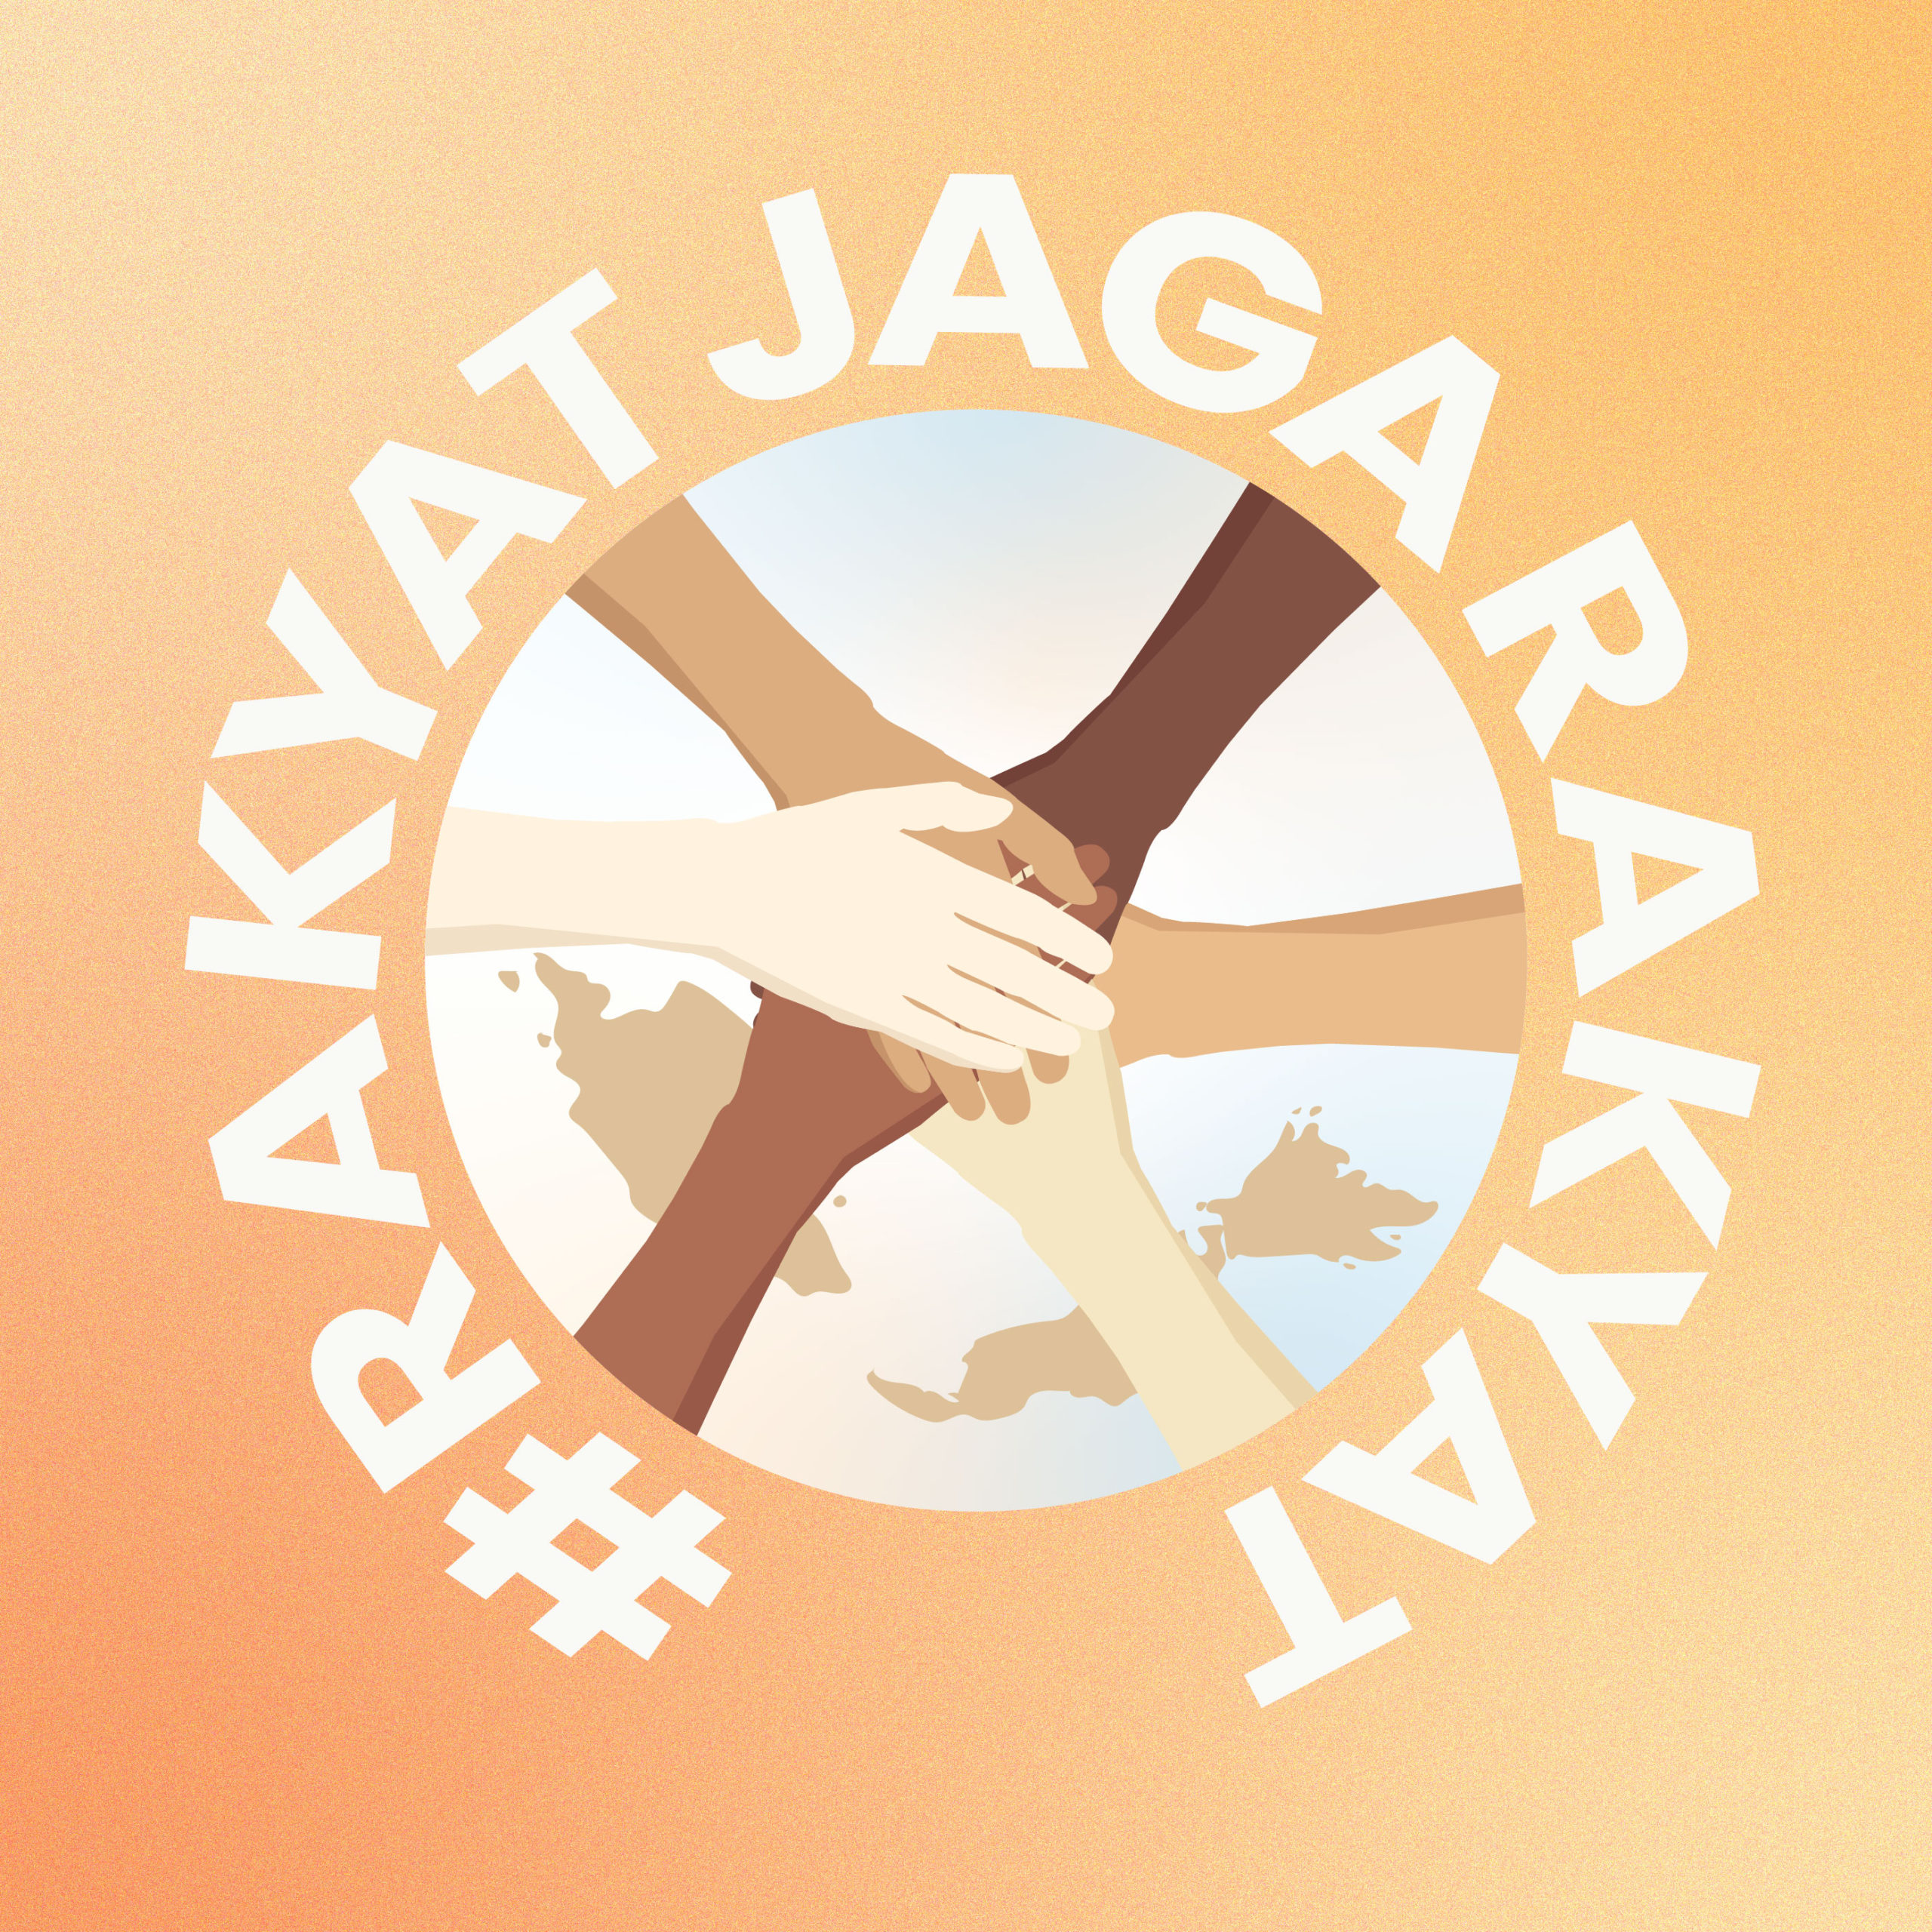 #RakyatJagaRakyat: 32 White flag initiatives and food aids in Malaysia to support